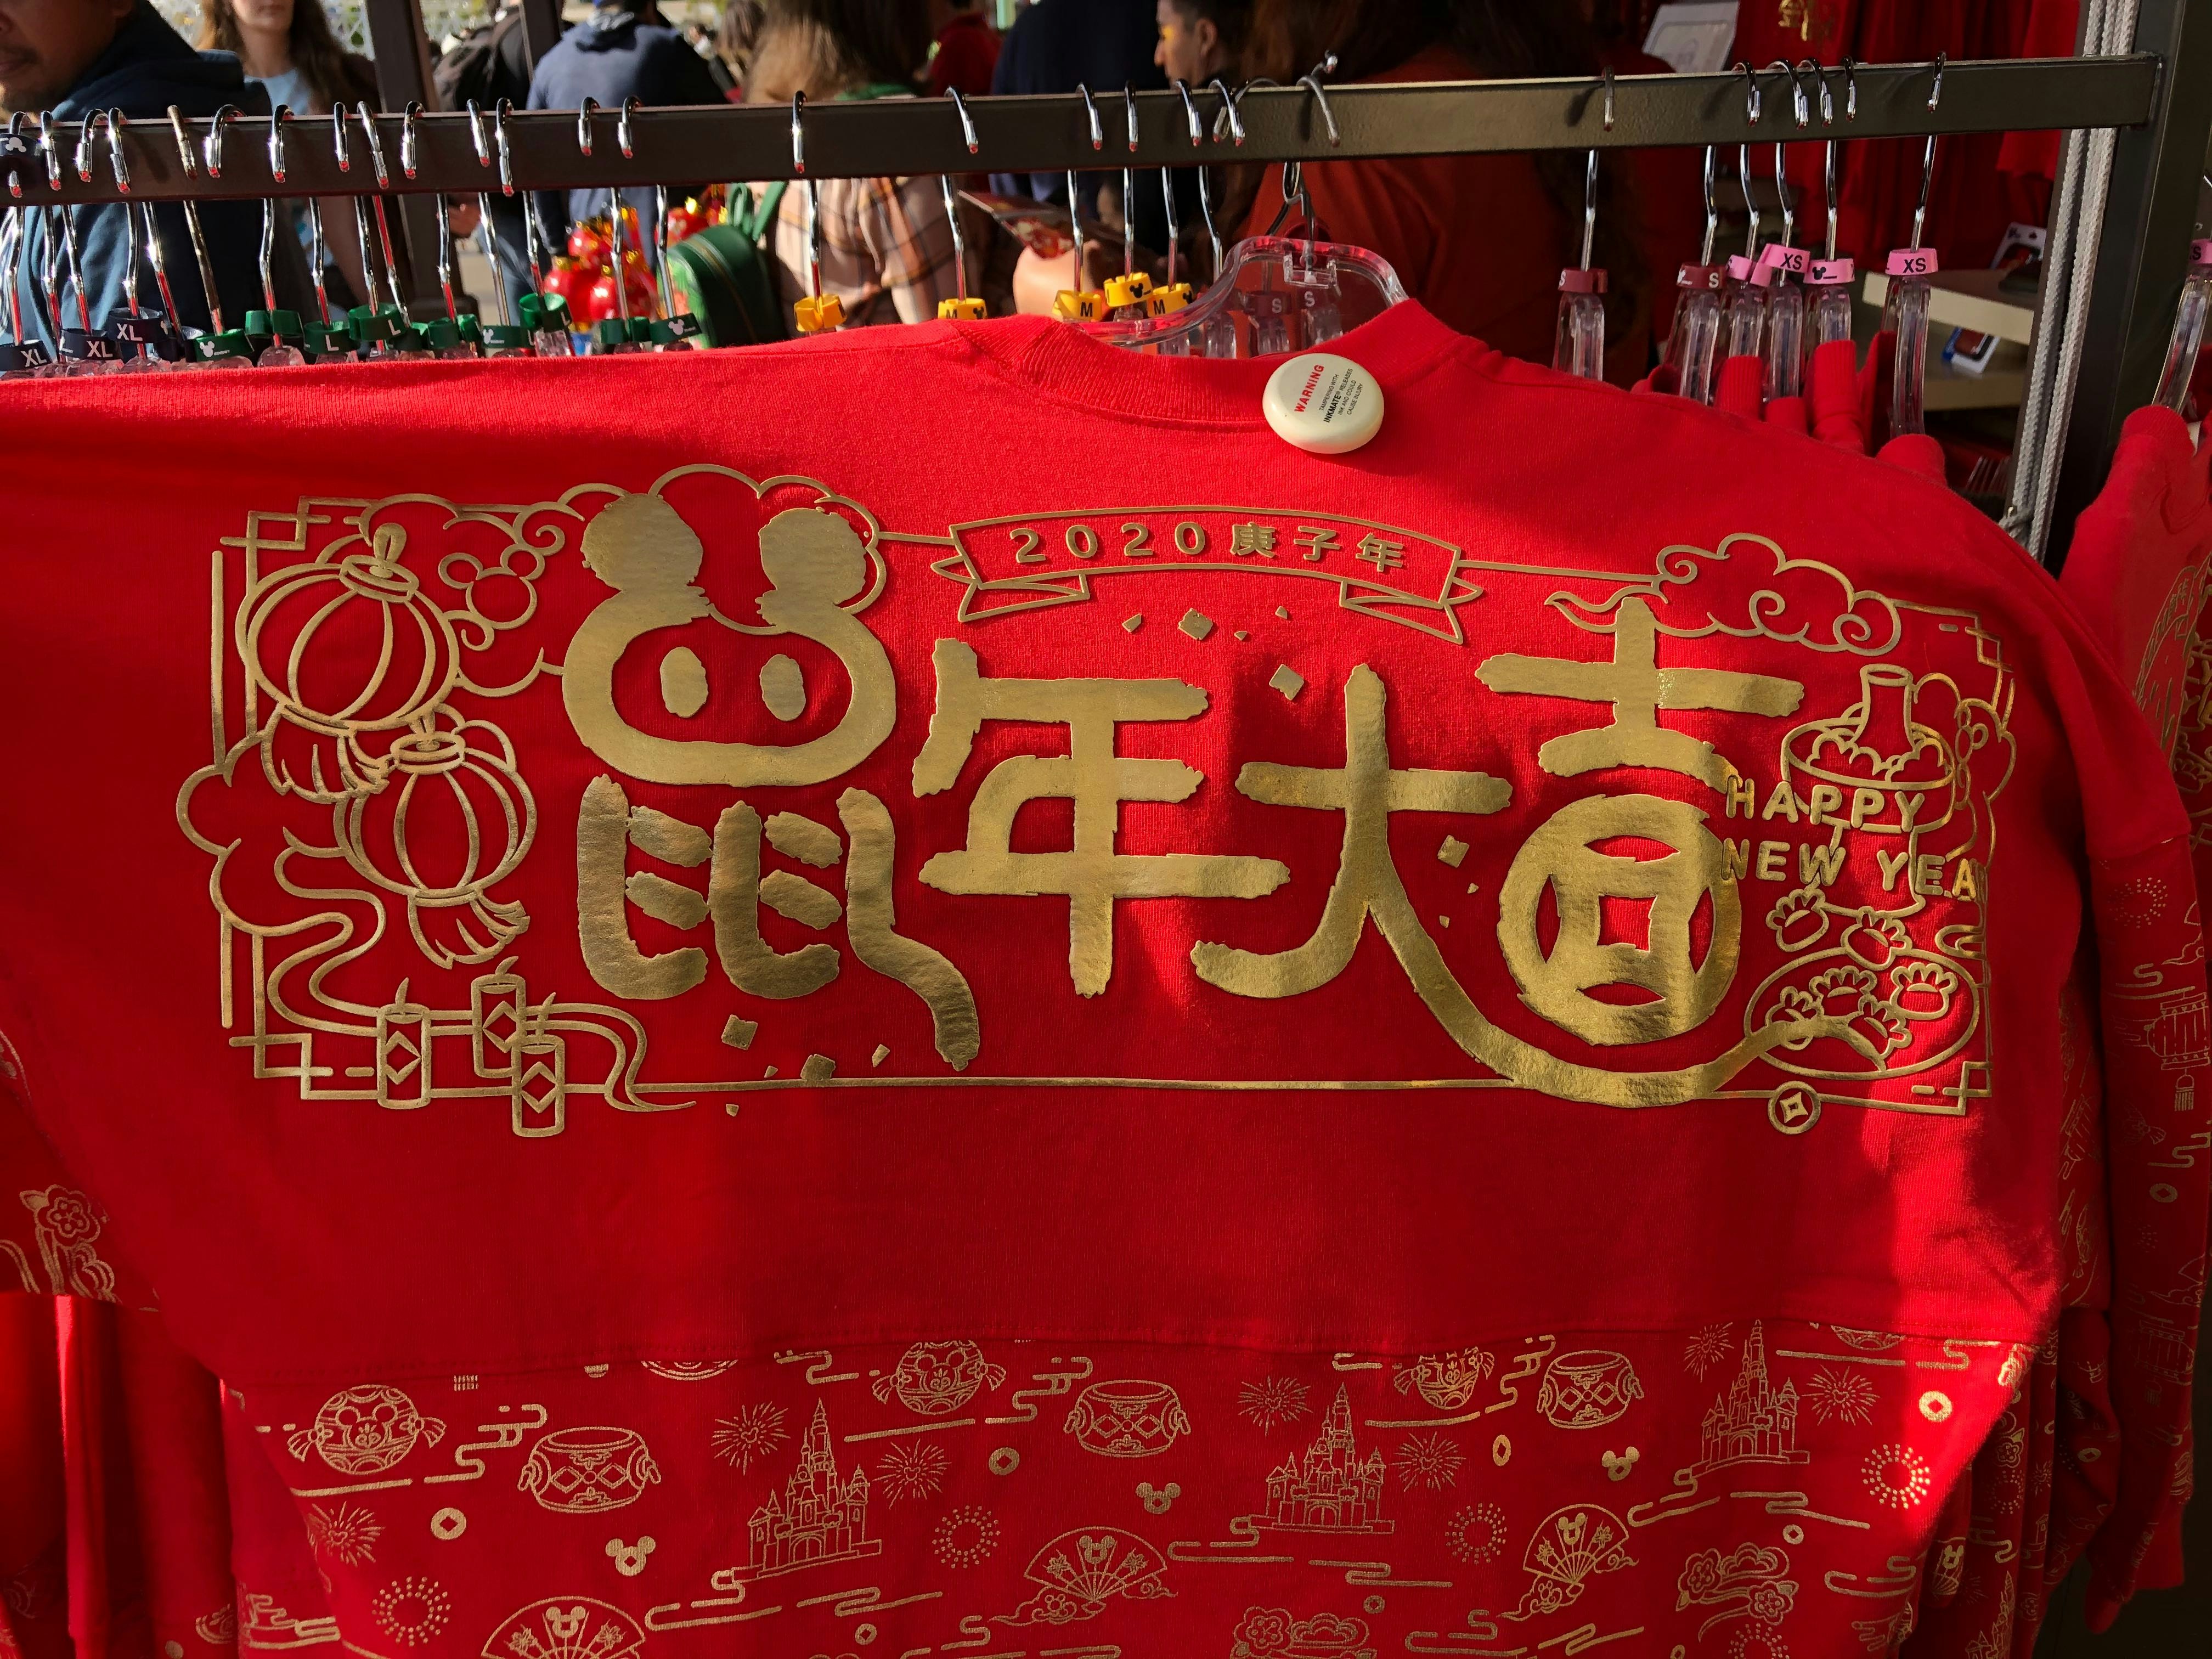 PHOTOS: Every Piece of Lunar New Year 2020 Merchandise (with Prices) at